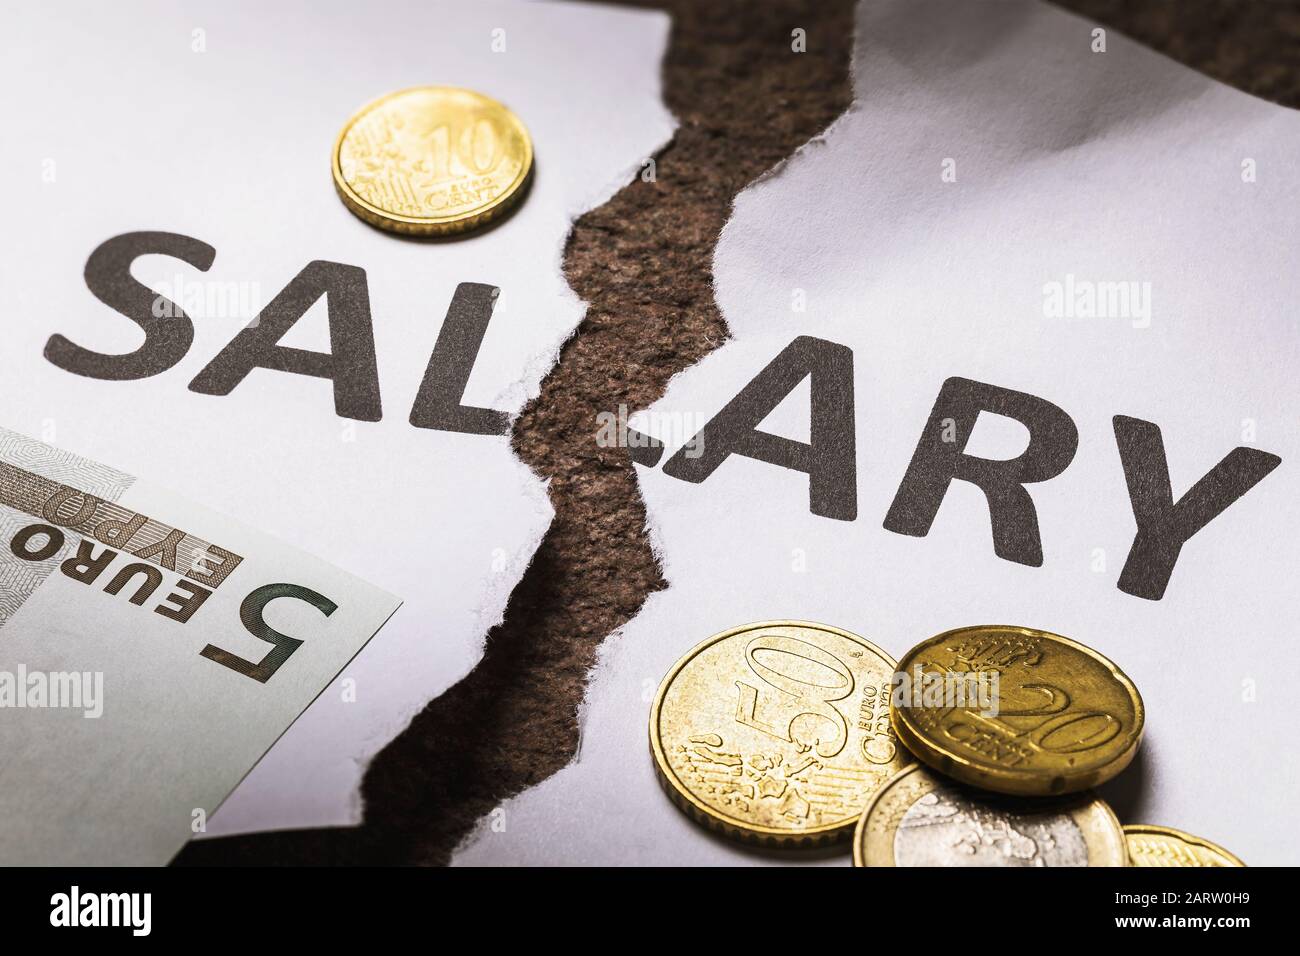 The paper with the inscription Salary is torn in half, next to it are EU money. Unpaid salary concept Stock Photo